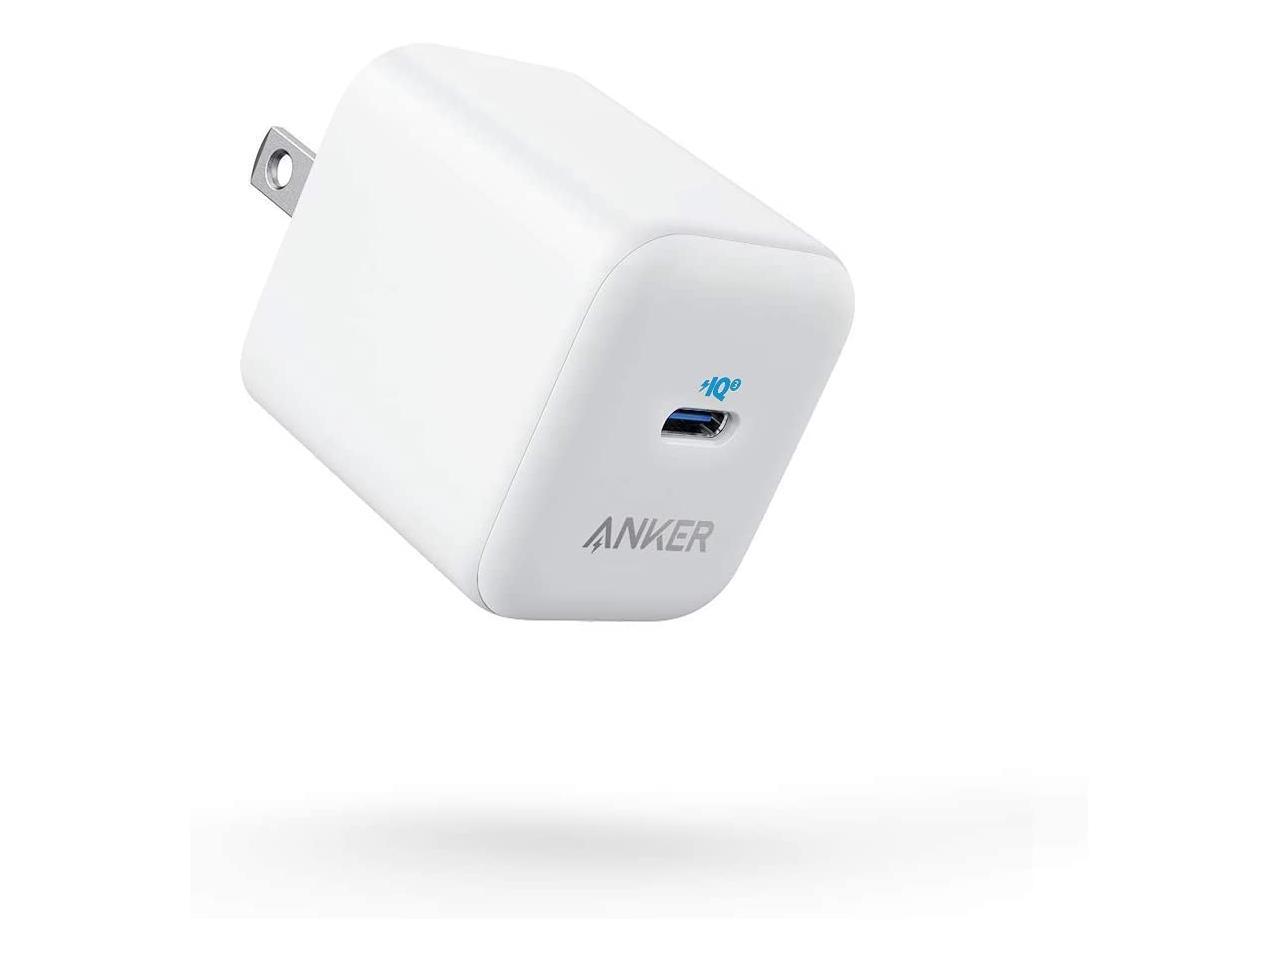 Anker PowerPort III 20W PIQ 3.0 Fast Charger with Foldable Plug, $10